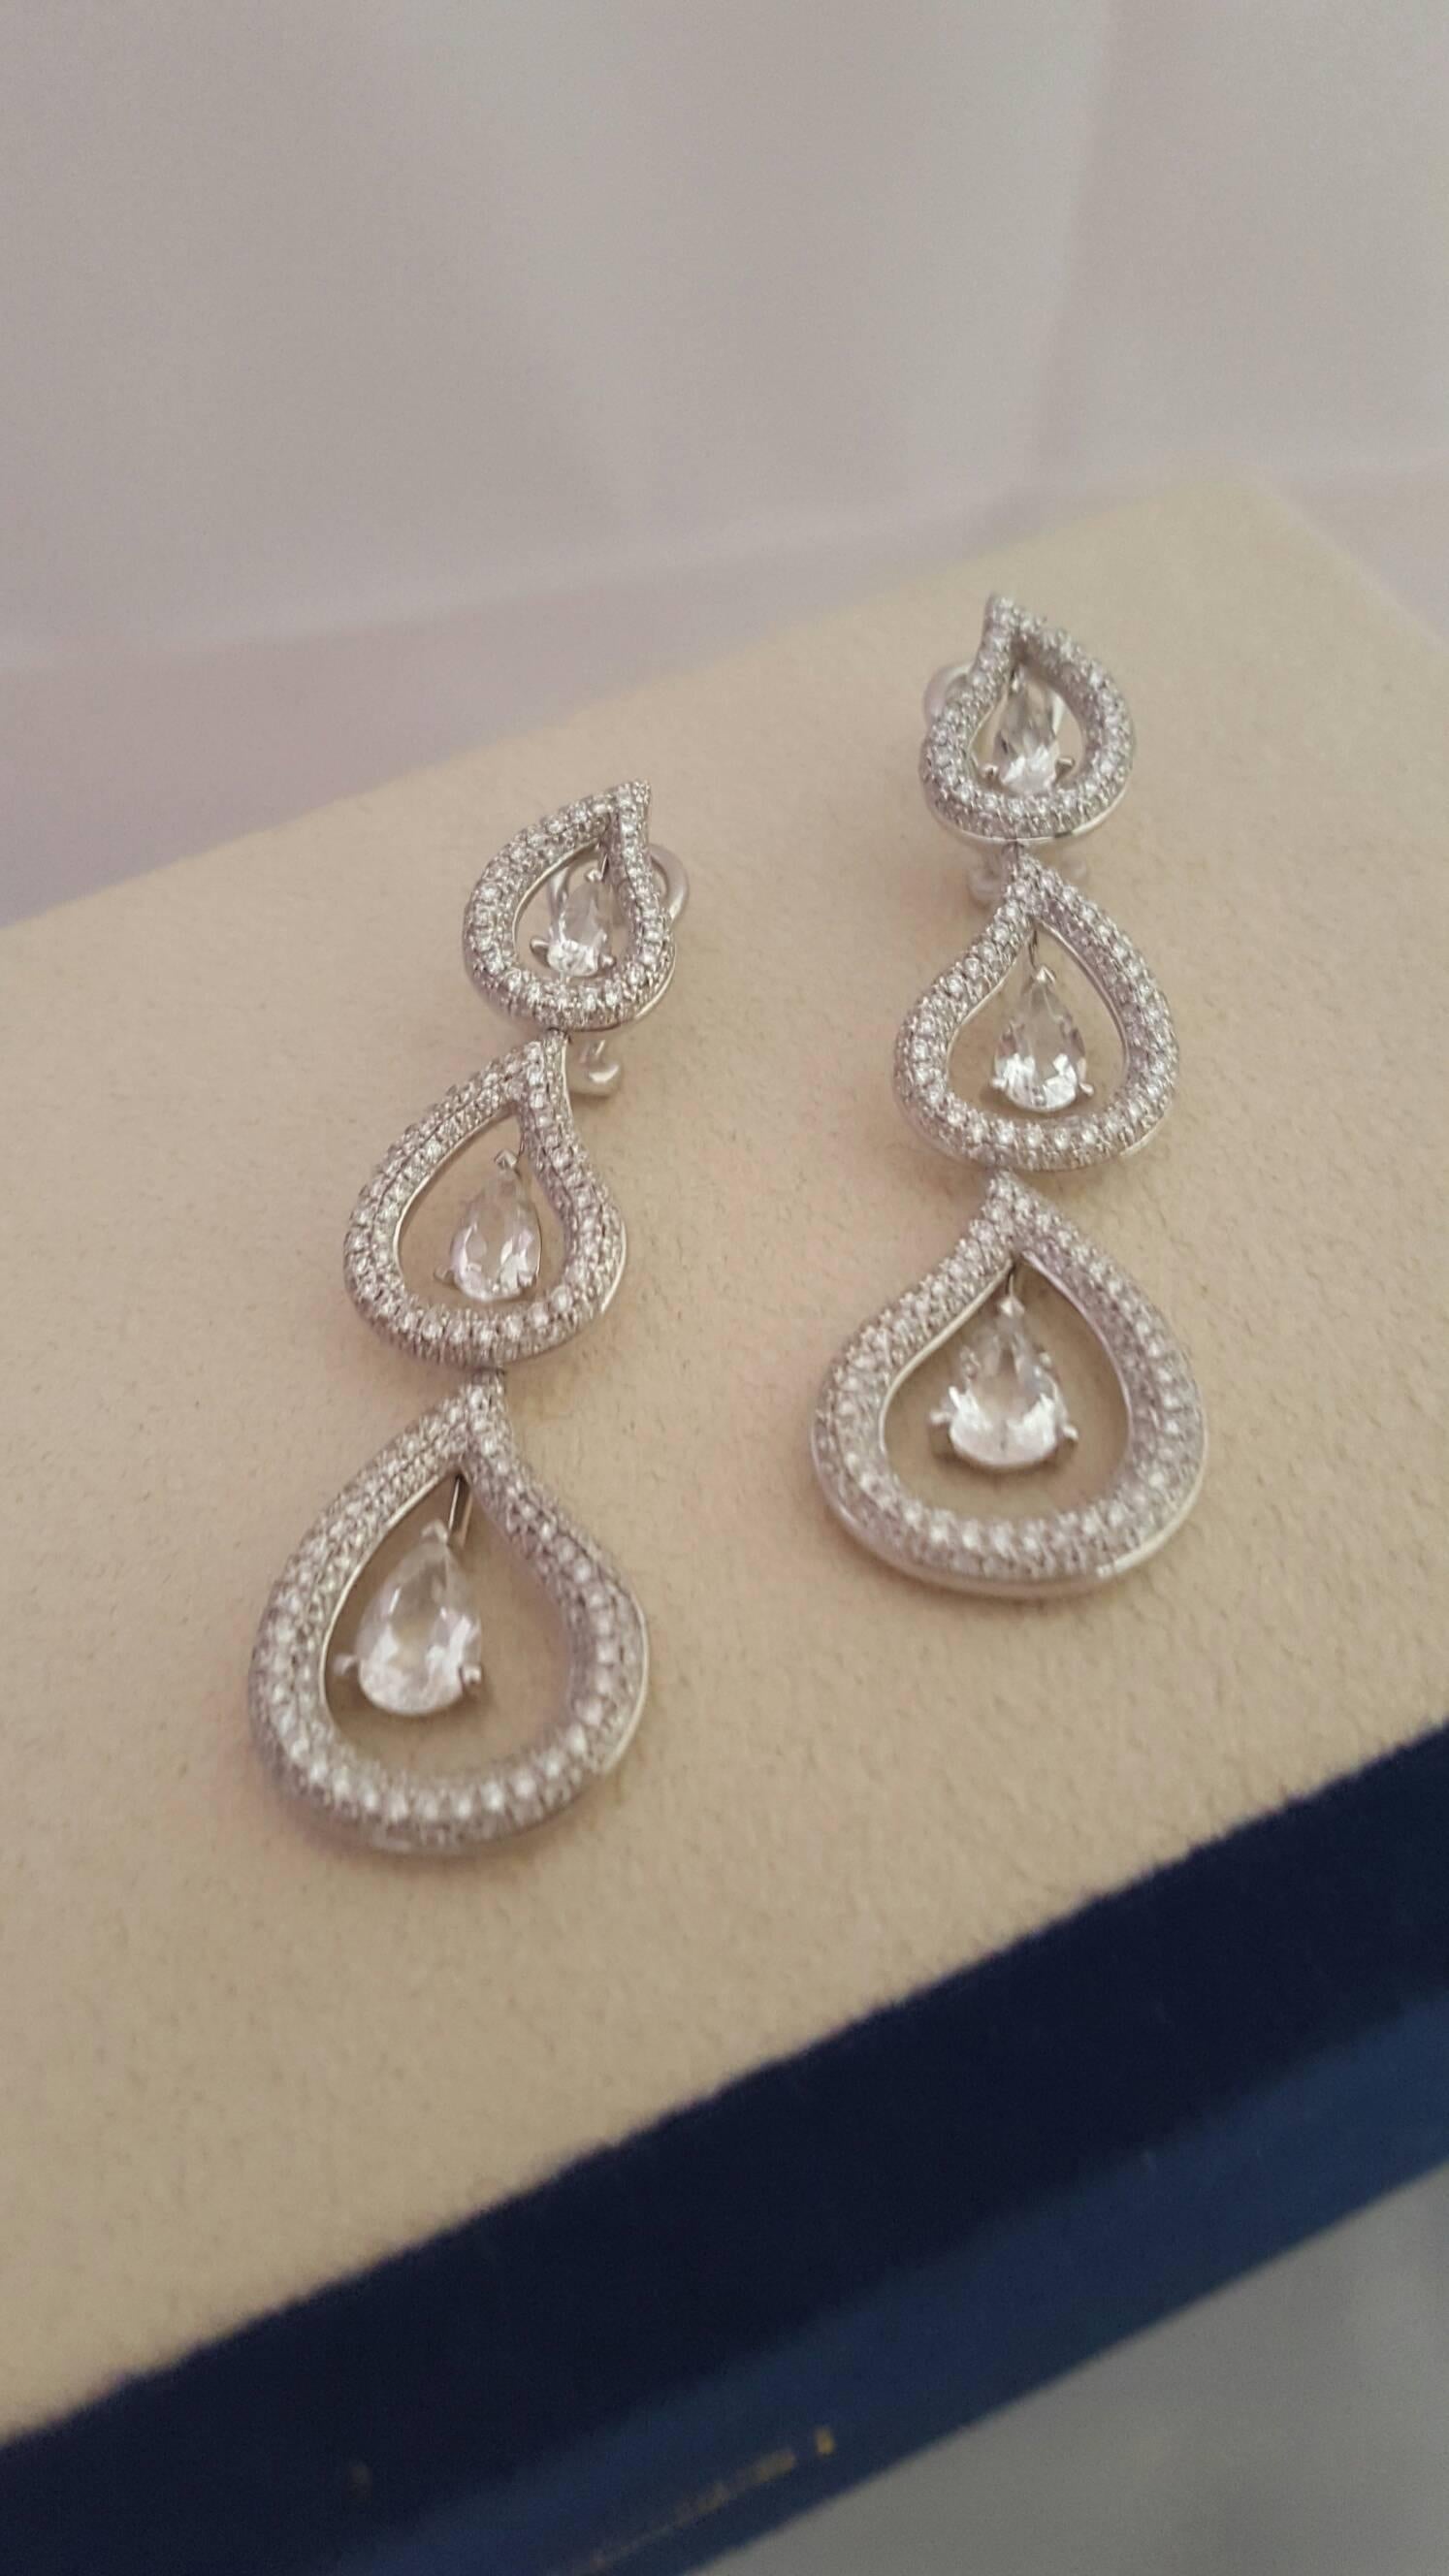 Elegant 18k White Gold Earrings enveloped in 2.56ct White Diamonds with 3ct graduated Topaz drops. Complete the look with matching Seafoam Drop Pendant.